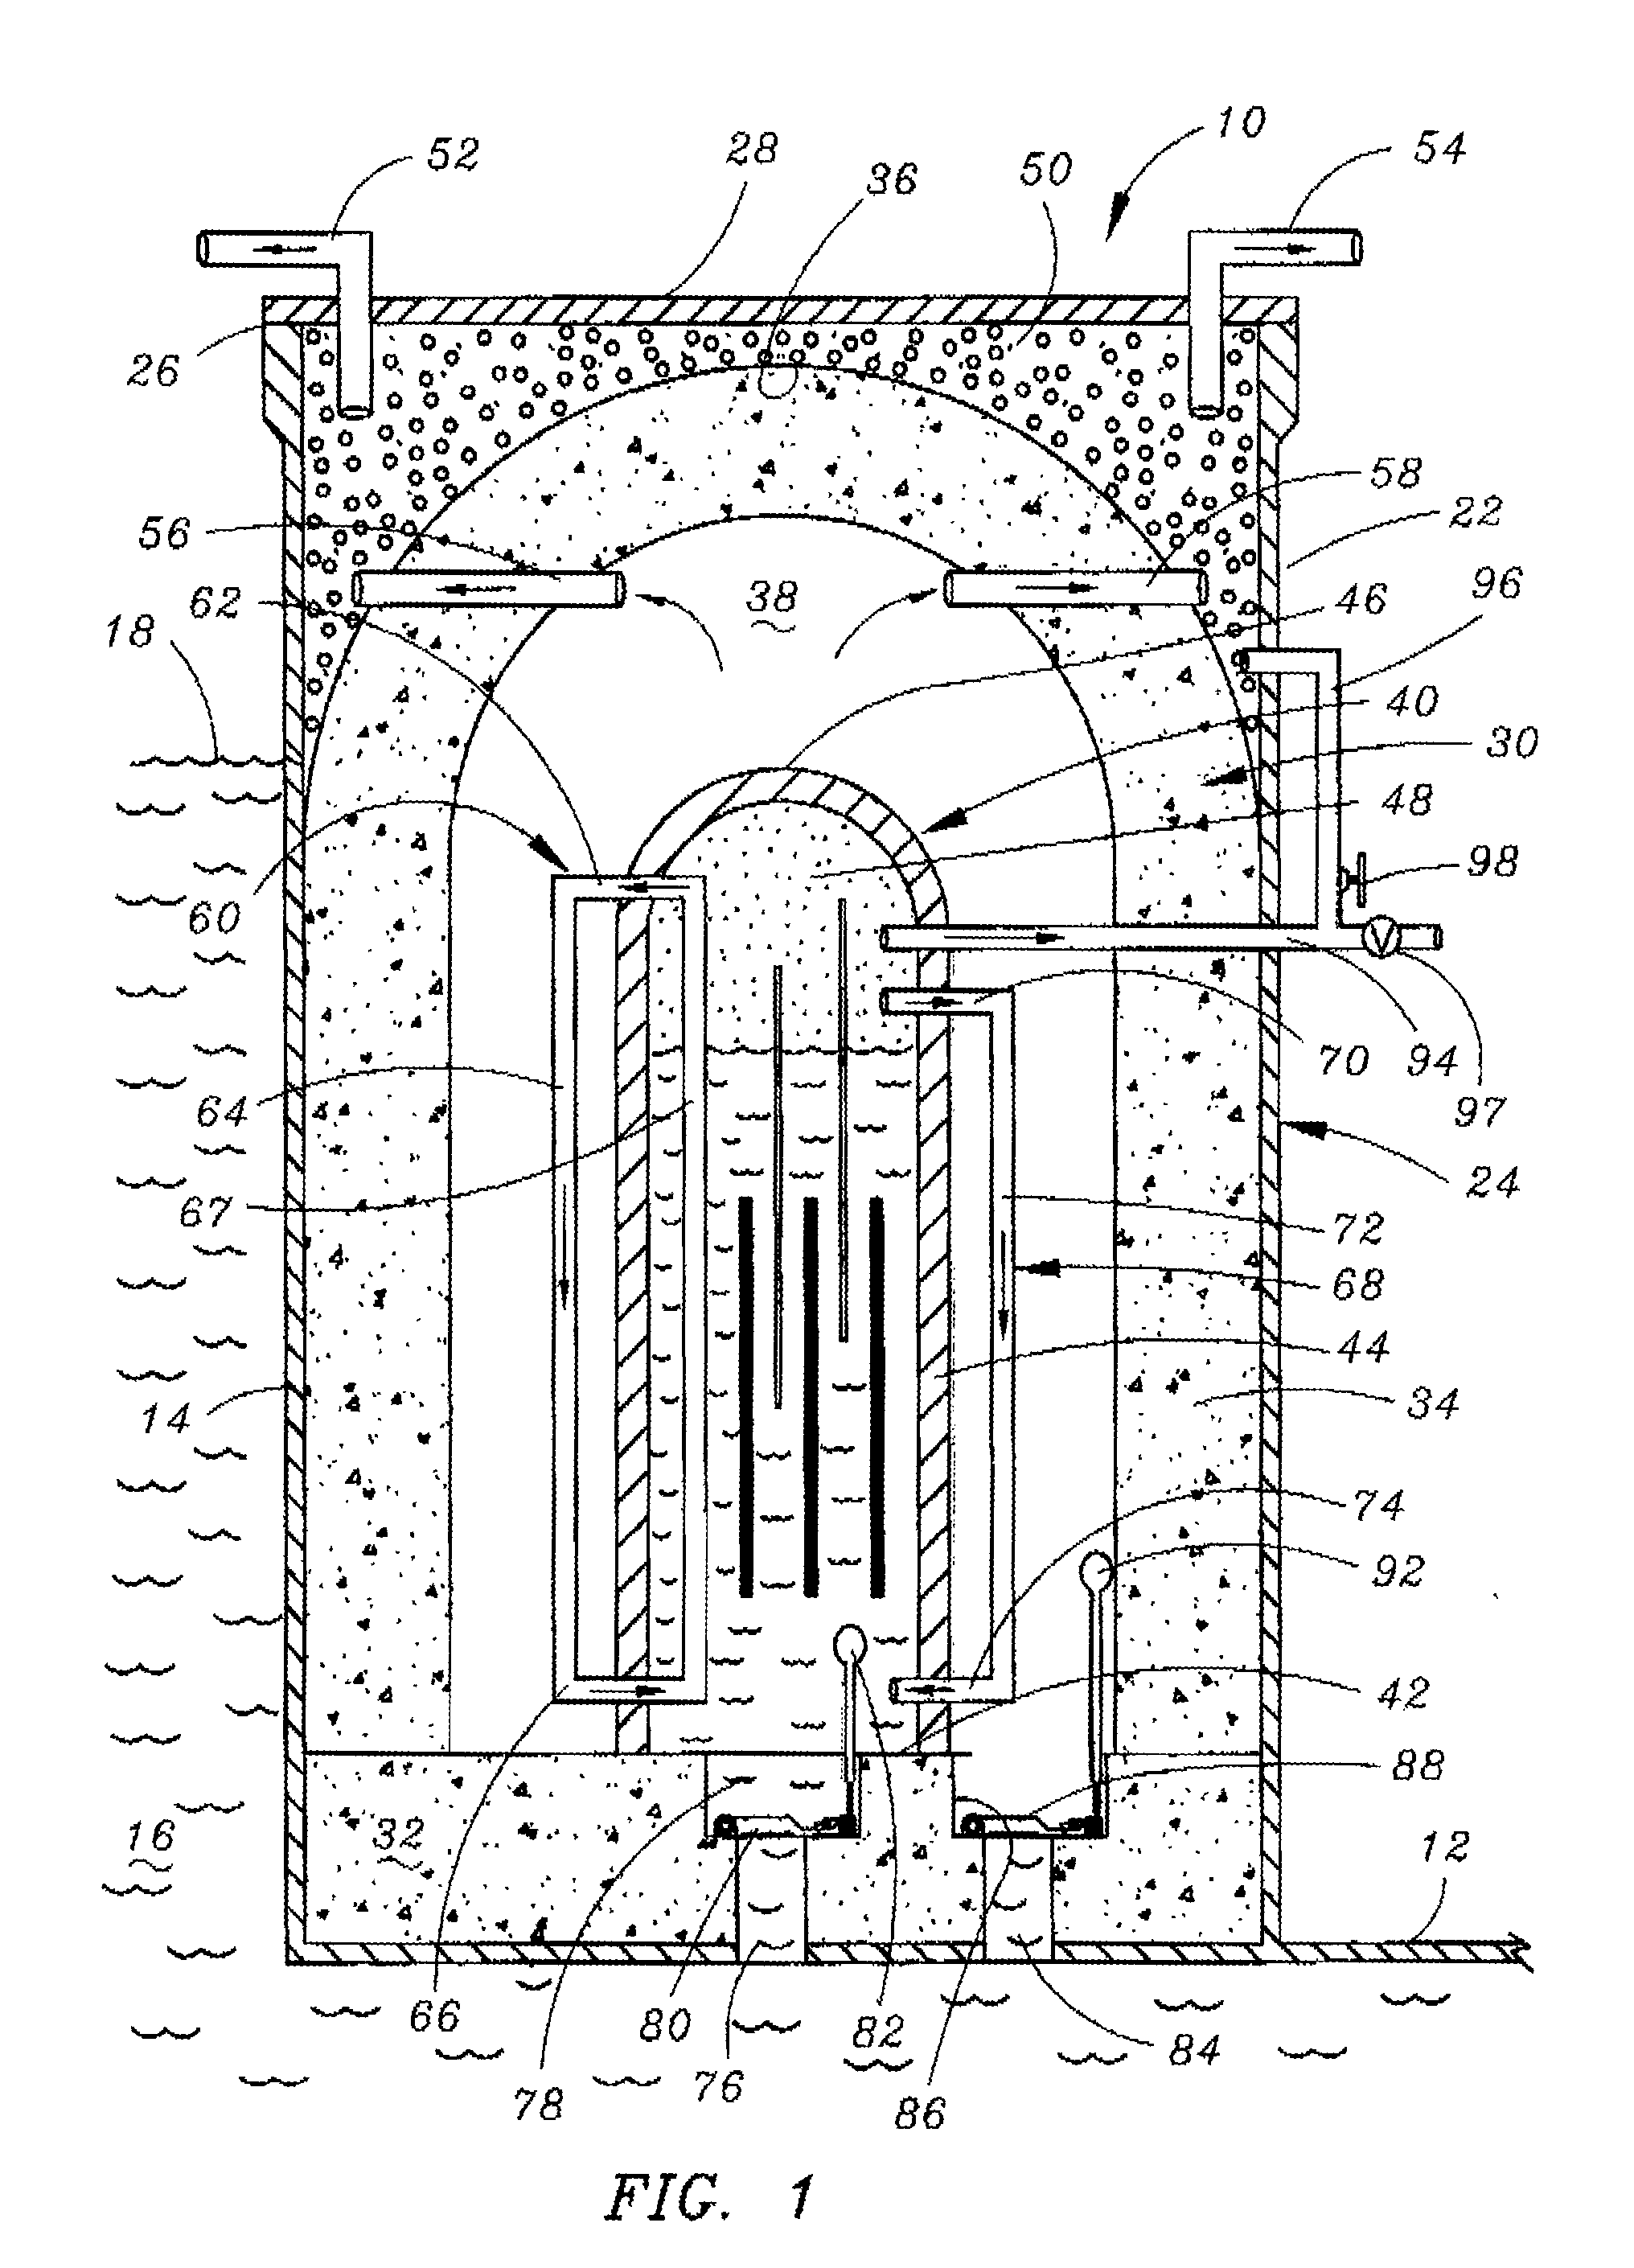 Floating nuclear power reactor with a self-cooling containment structure and an emergency heat exchange system